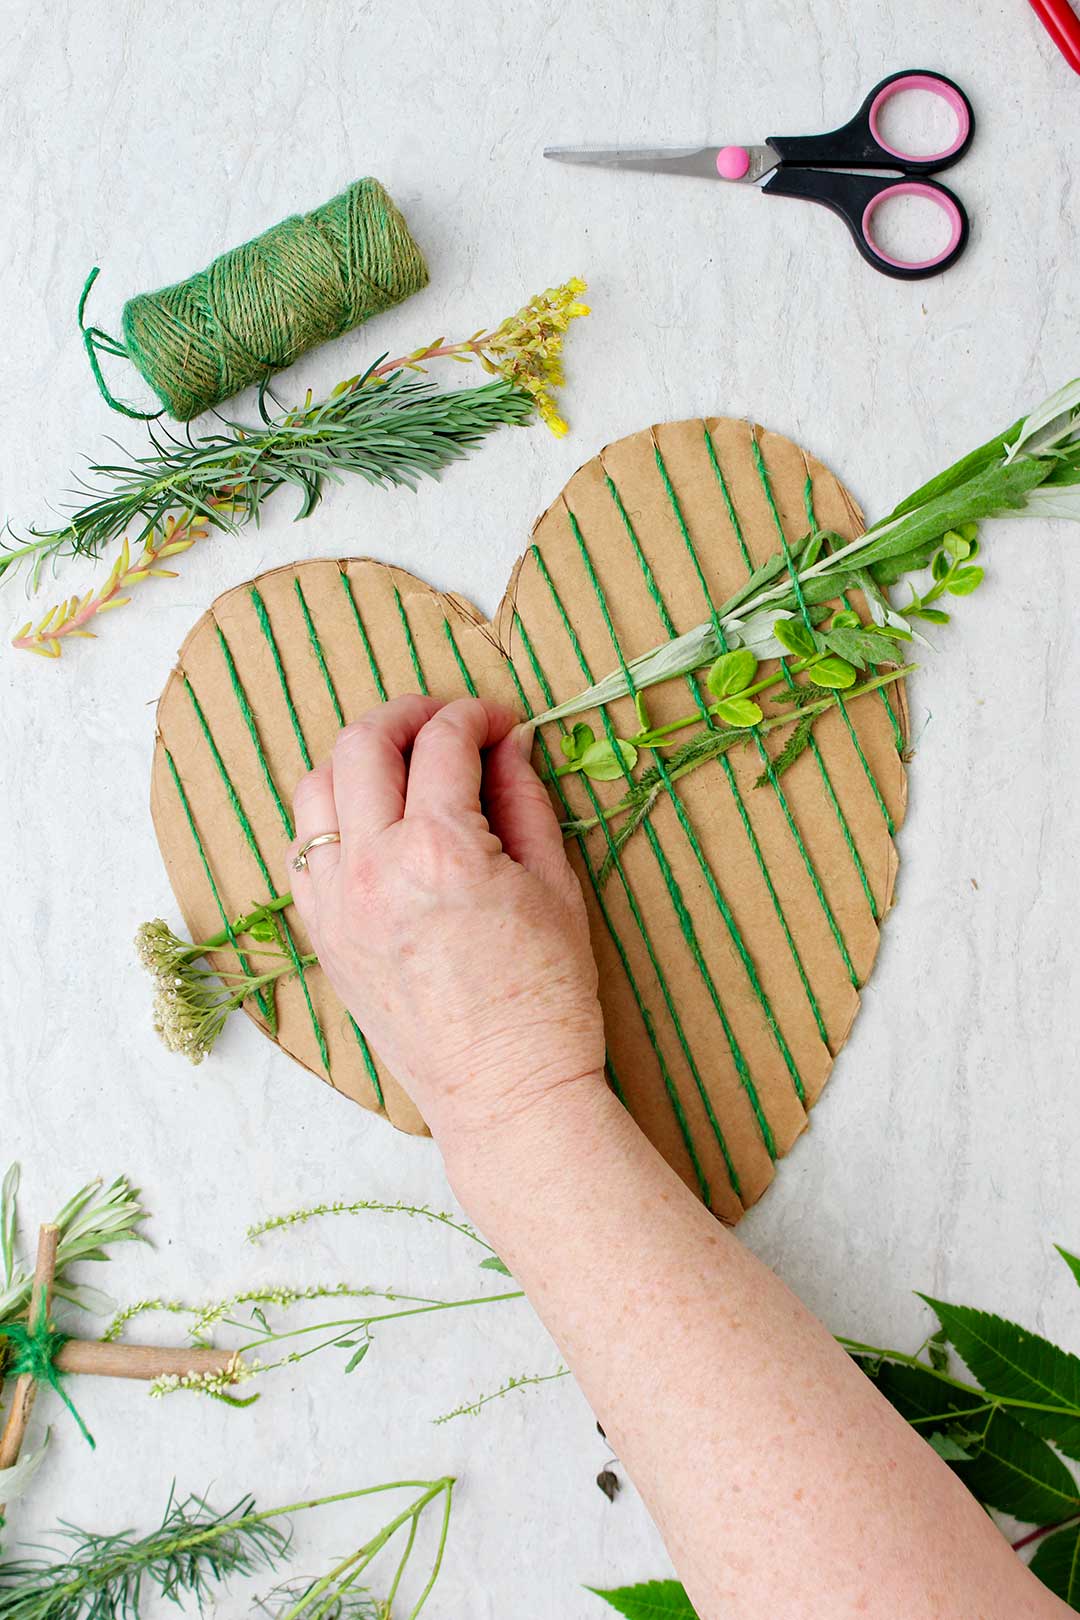 Hand weaving in pieces of greenery on heart shaped cardboard weaving project with supplies scattered near by.